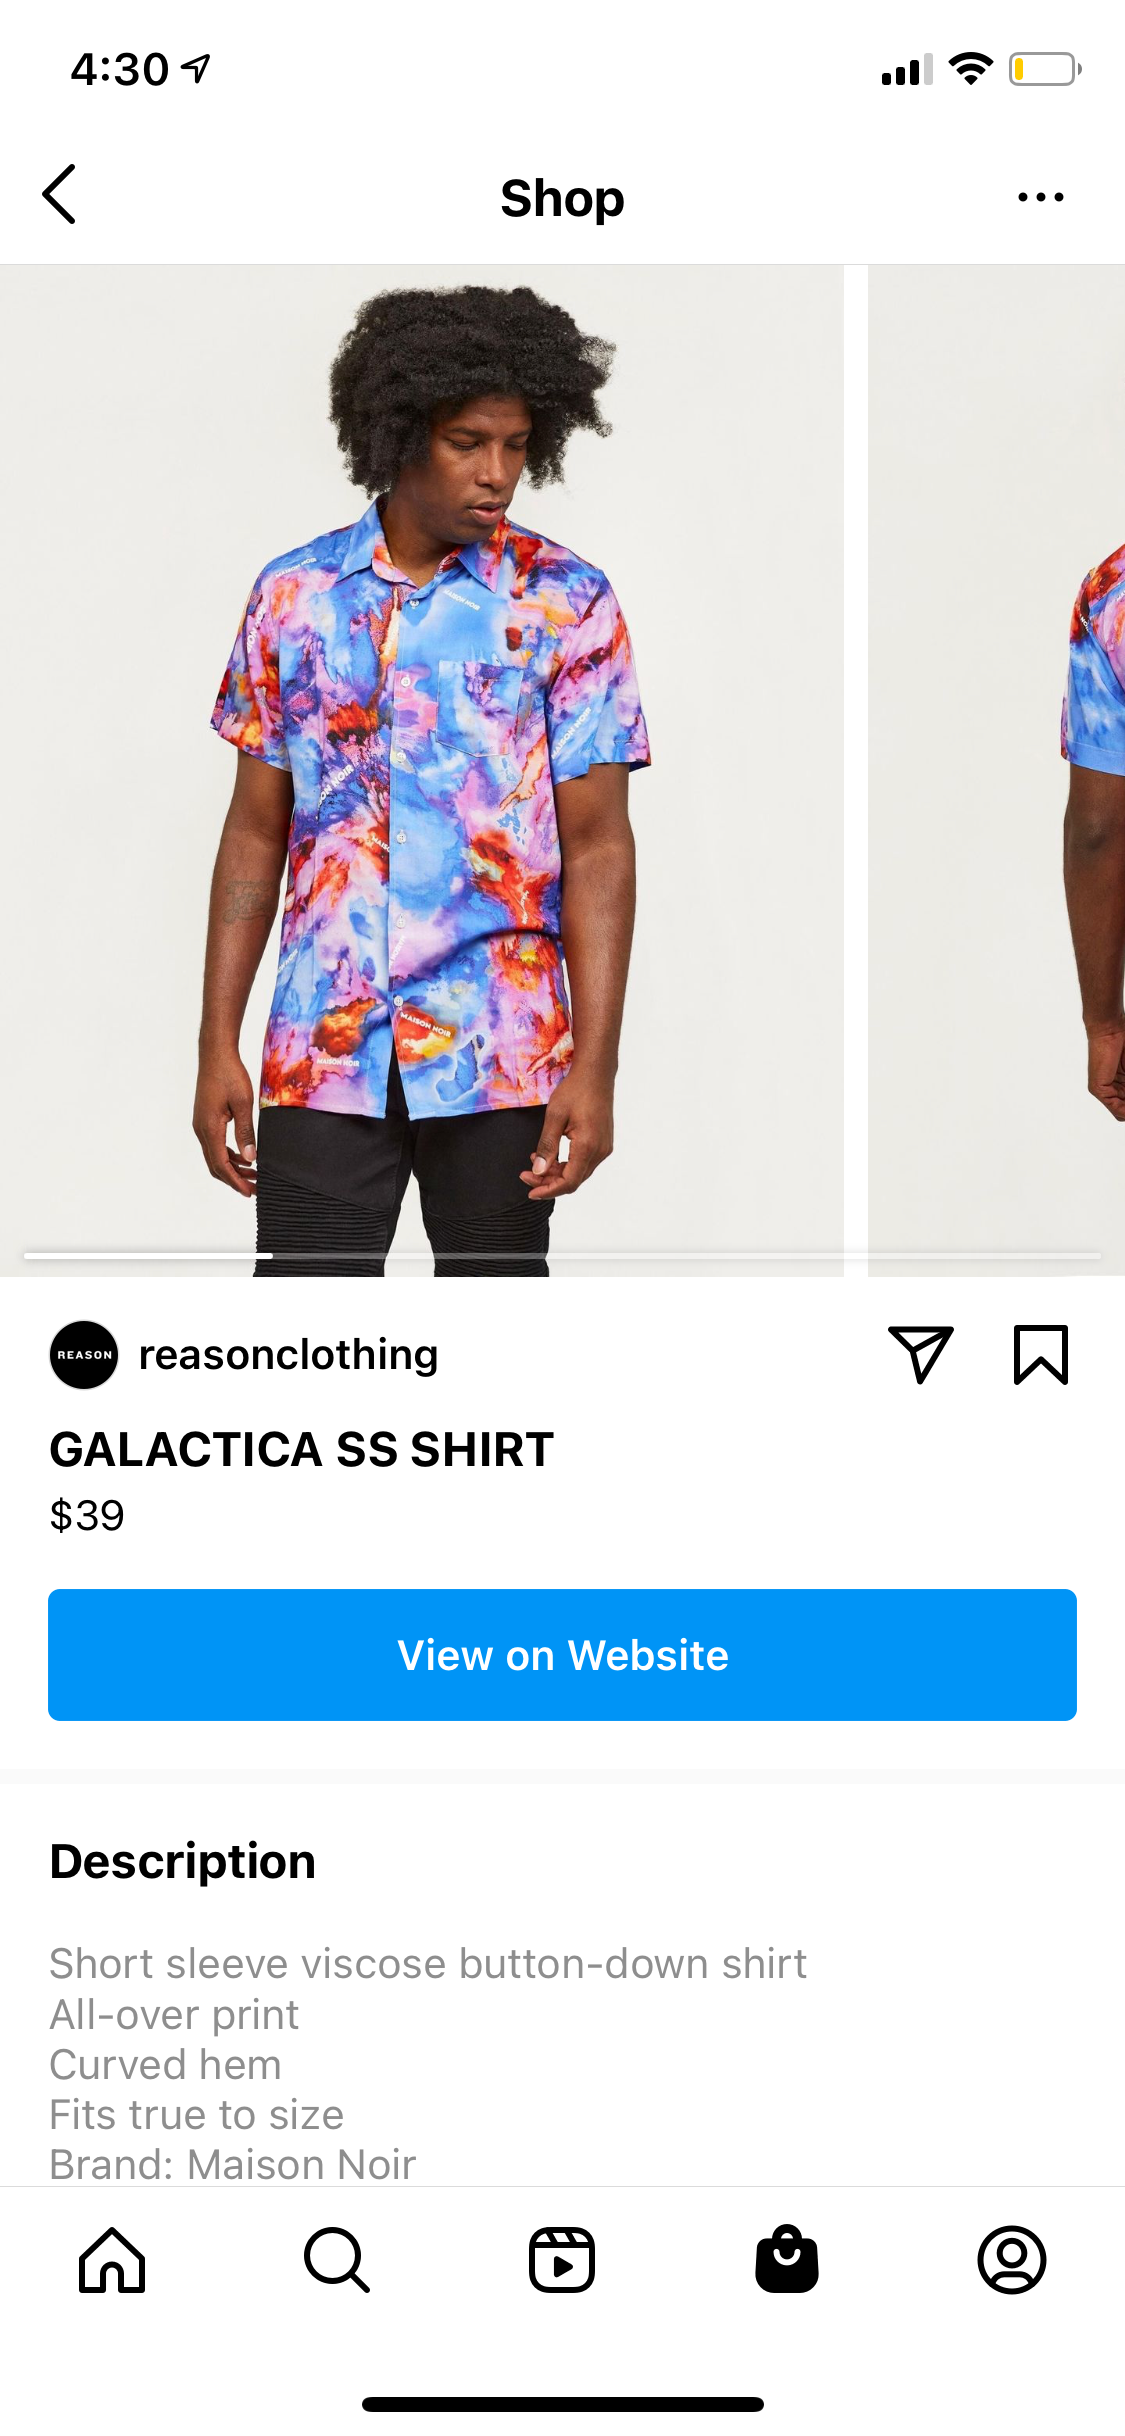 instagram shopping product view